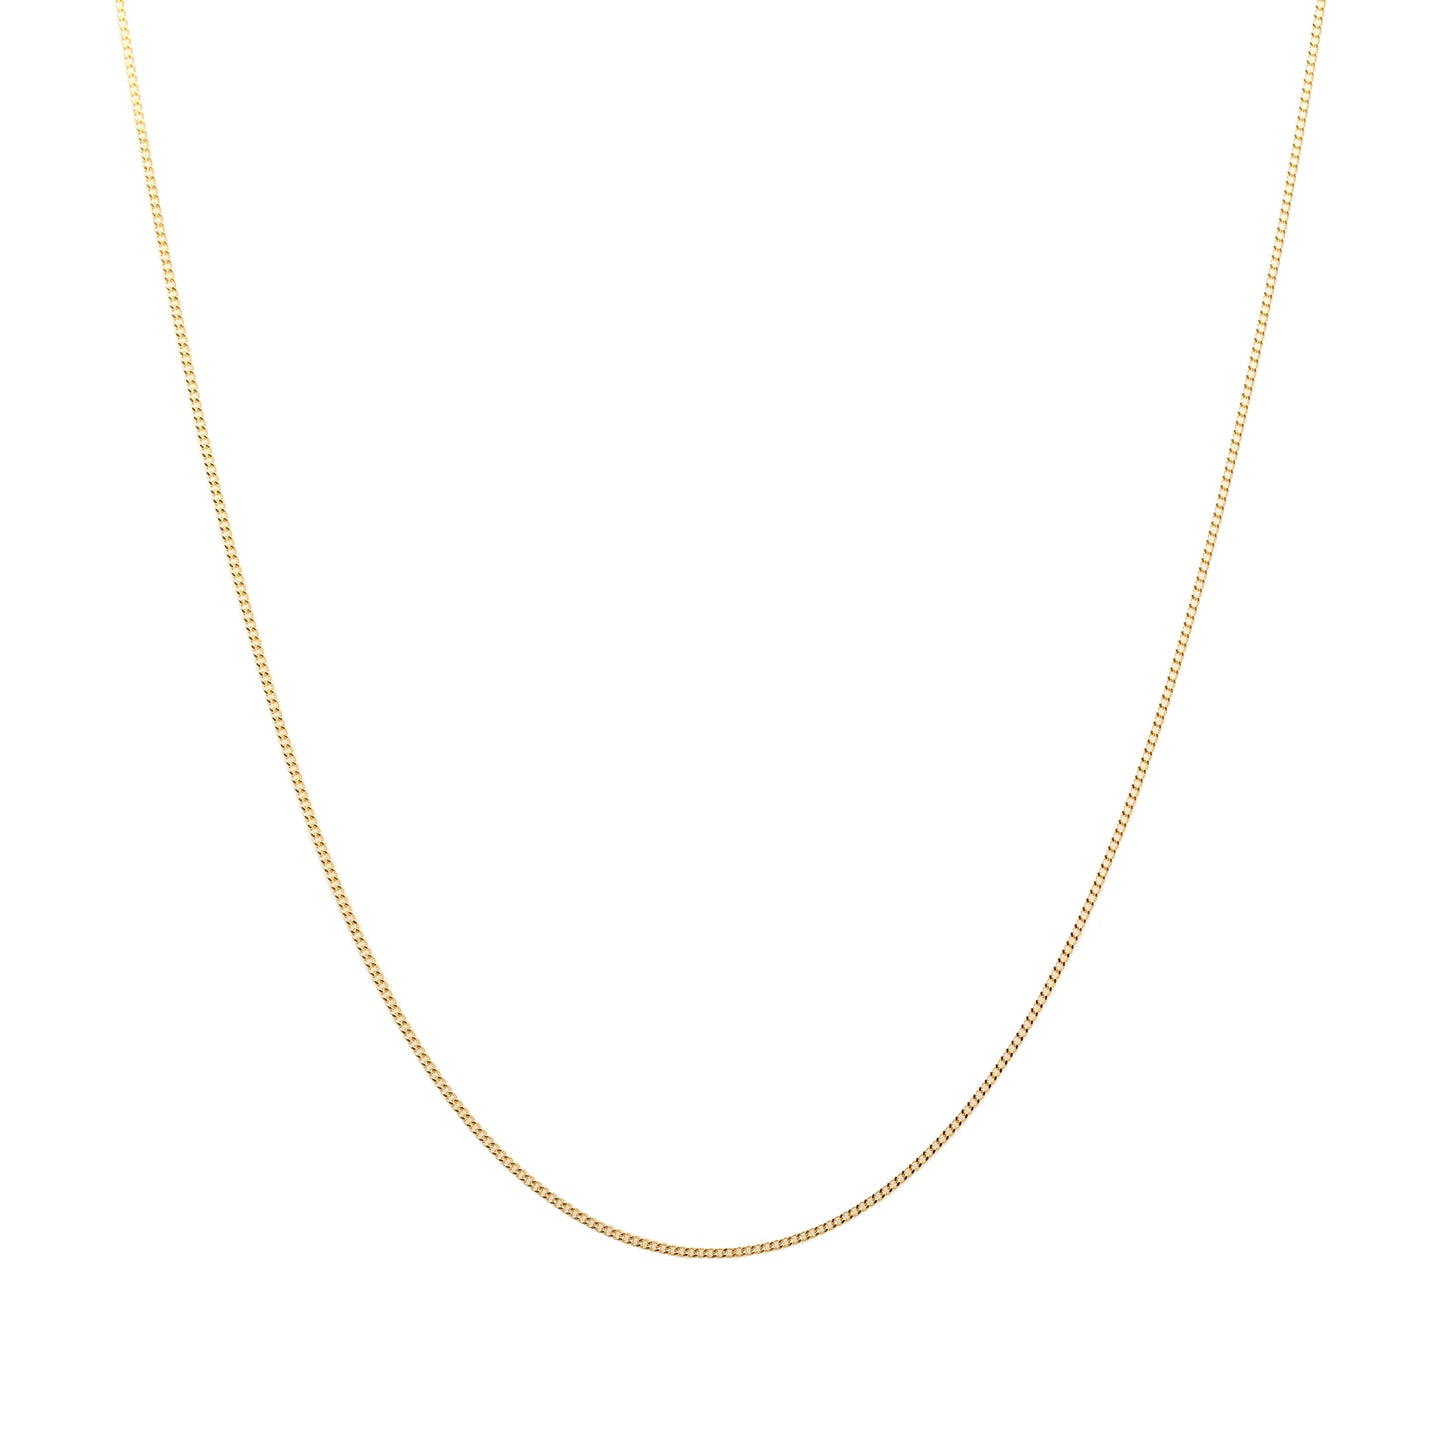 24k Gold Chain 16 Inches